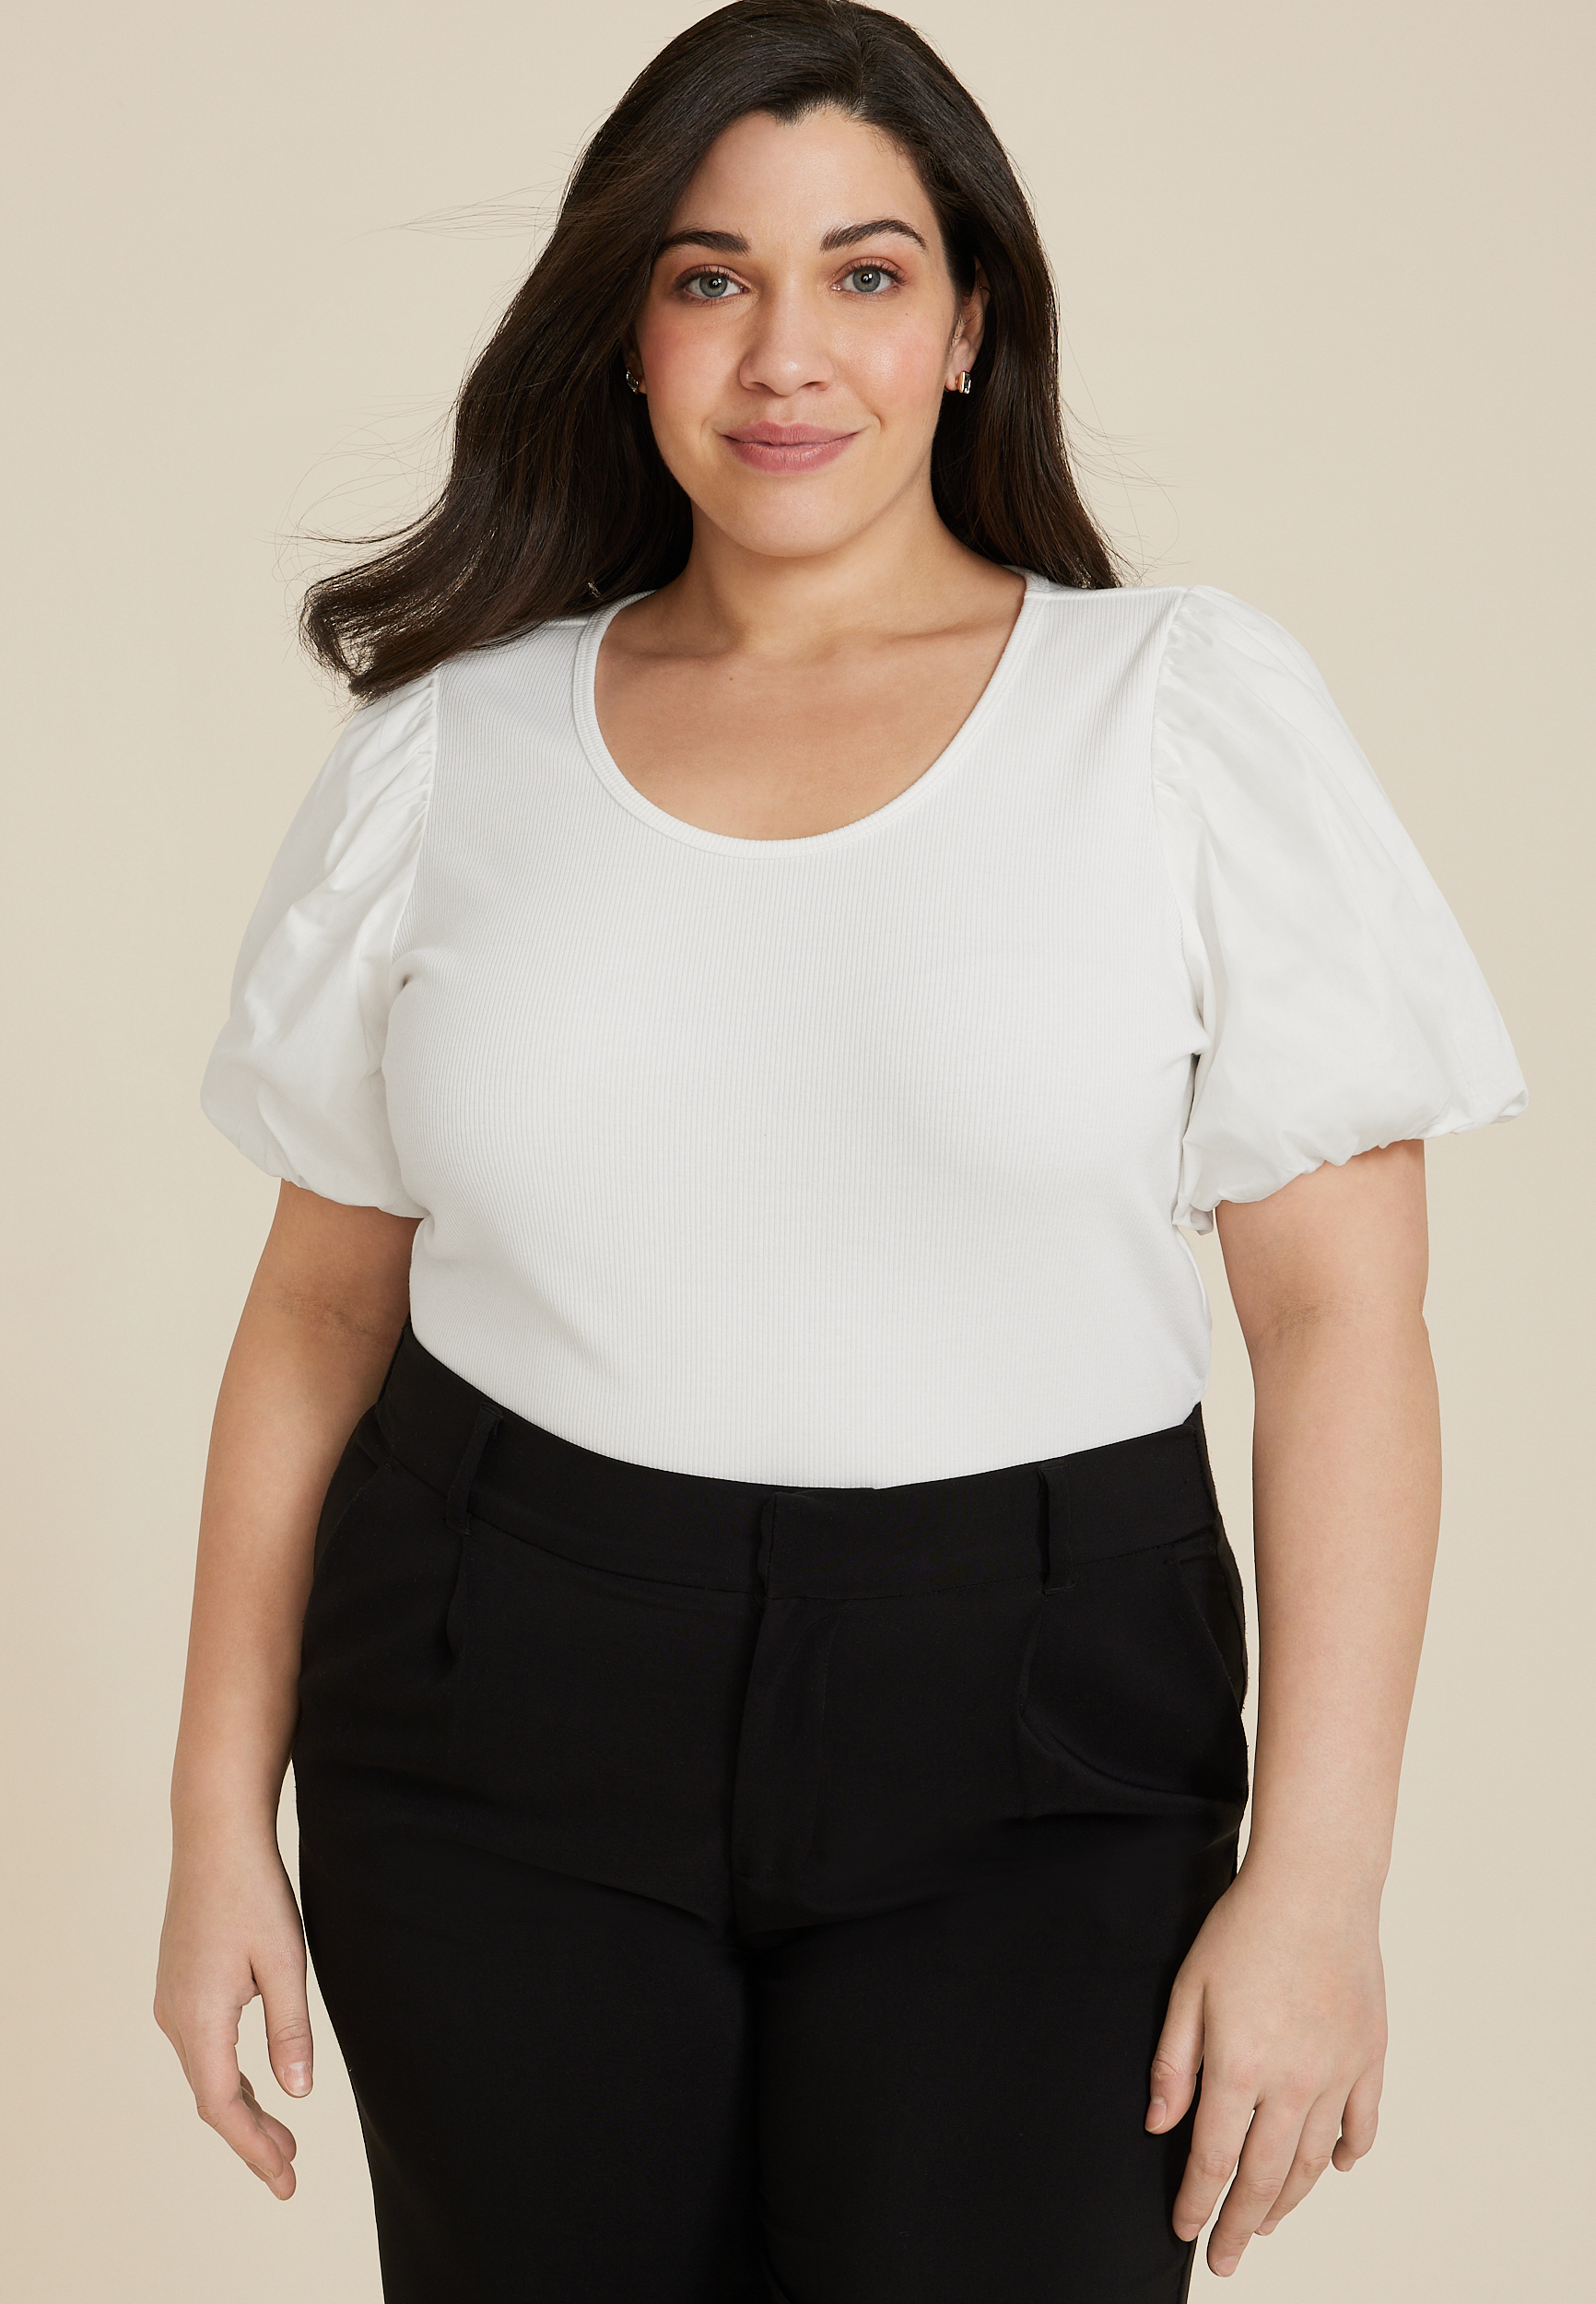 Plus Size Women's Tops for sale in Baltimore, Maryland